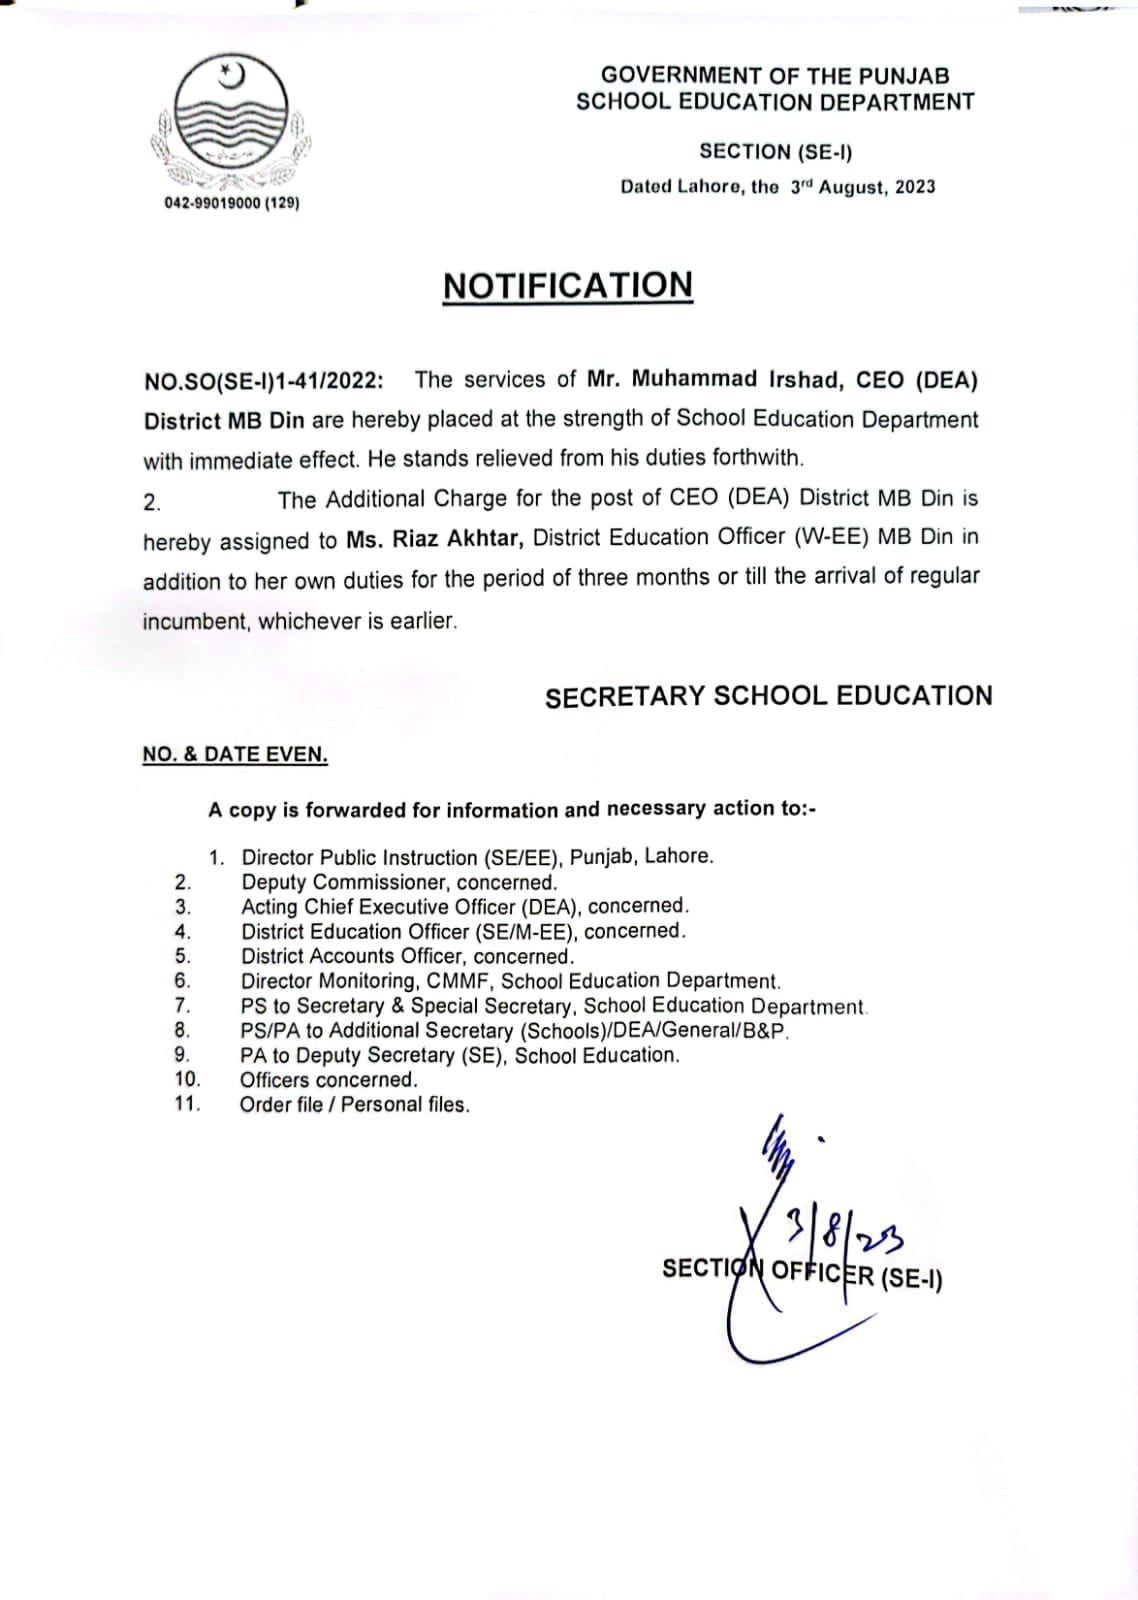 The services of Mr. Muhammad Irshad, CEO (DEA) District MB Din are hereby placed at the strength of School Education Department